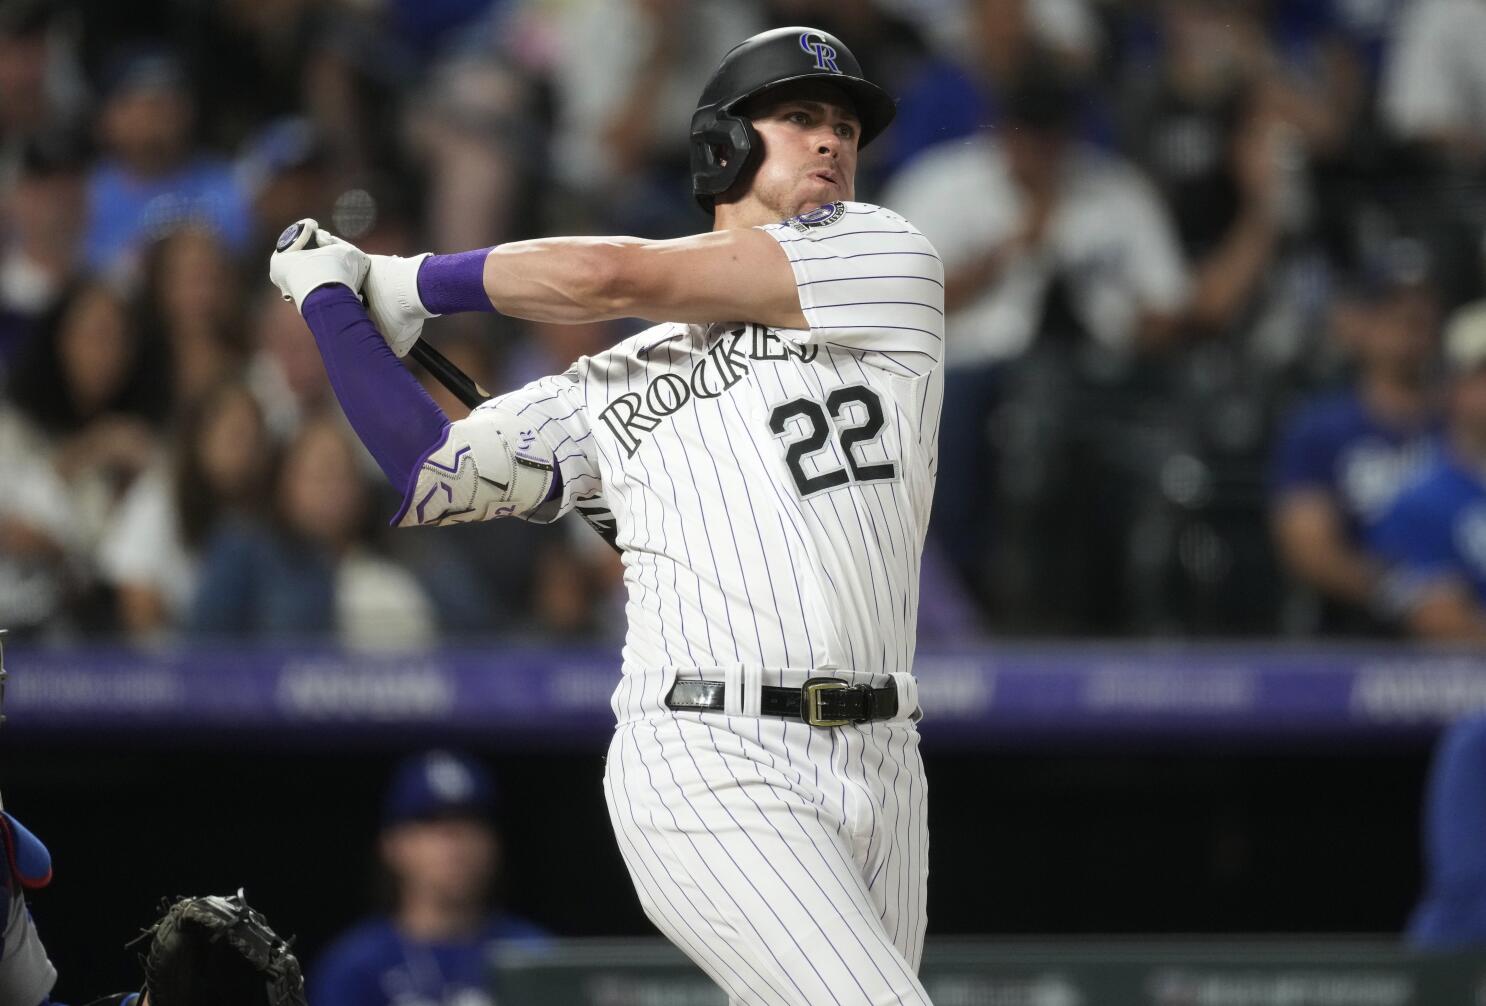 Rockies play host the Giants to open 3-game series - Sentinel Colorado